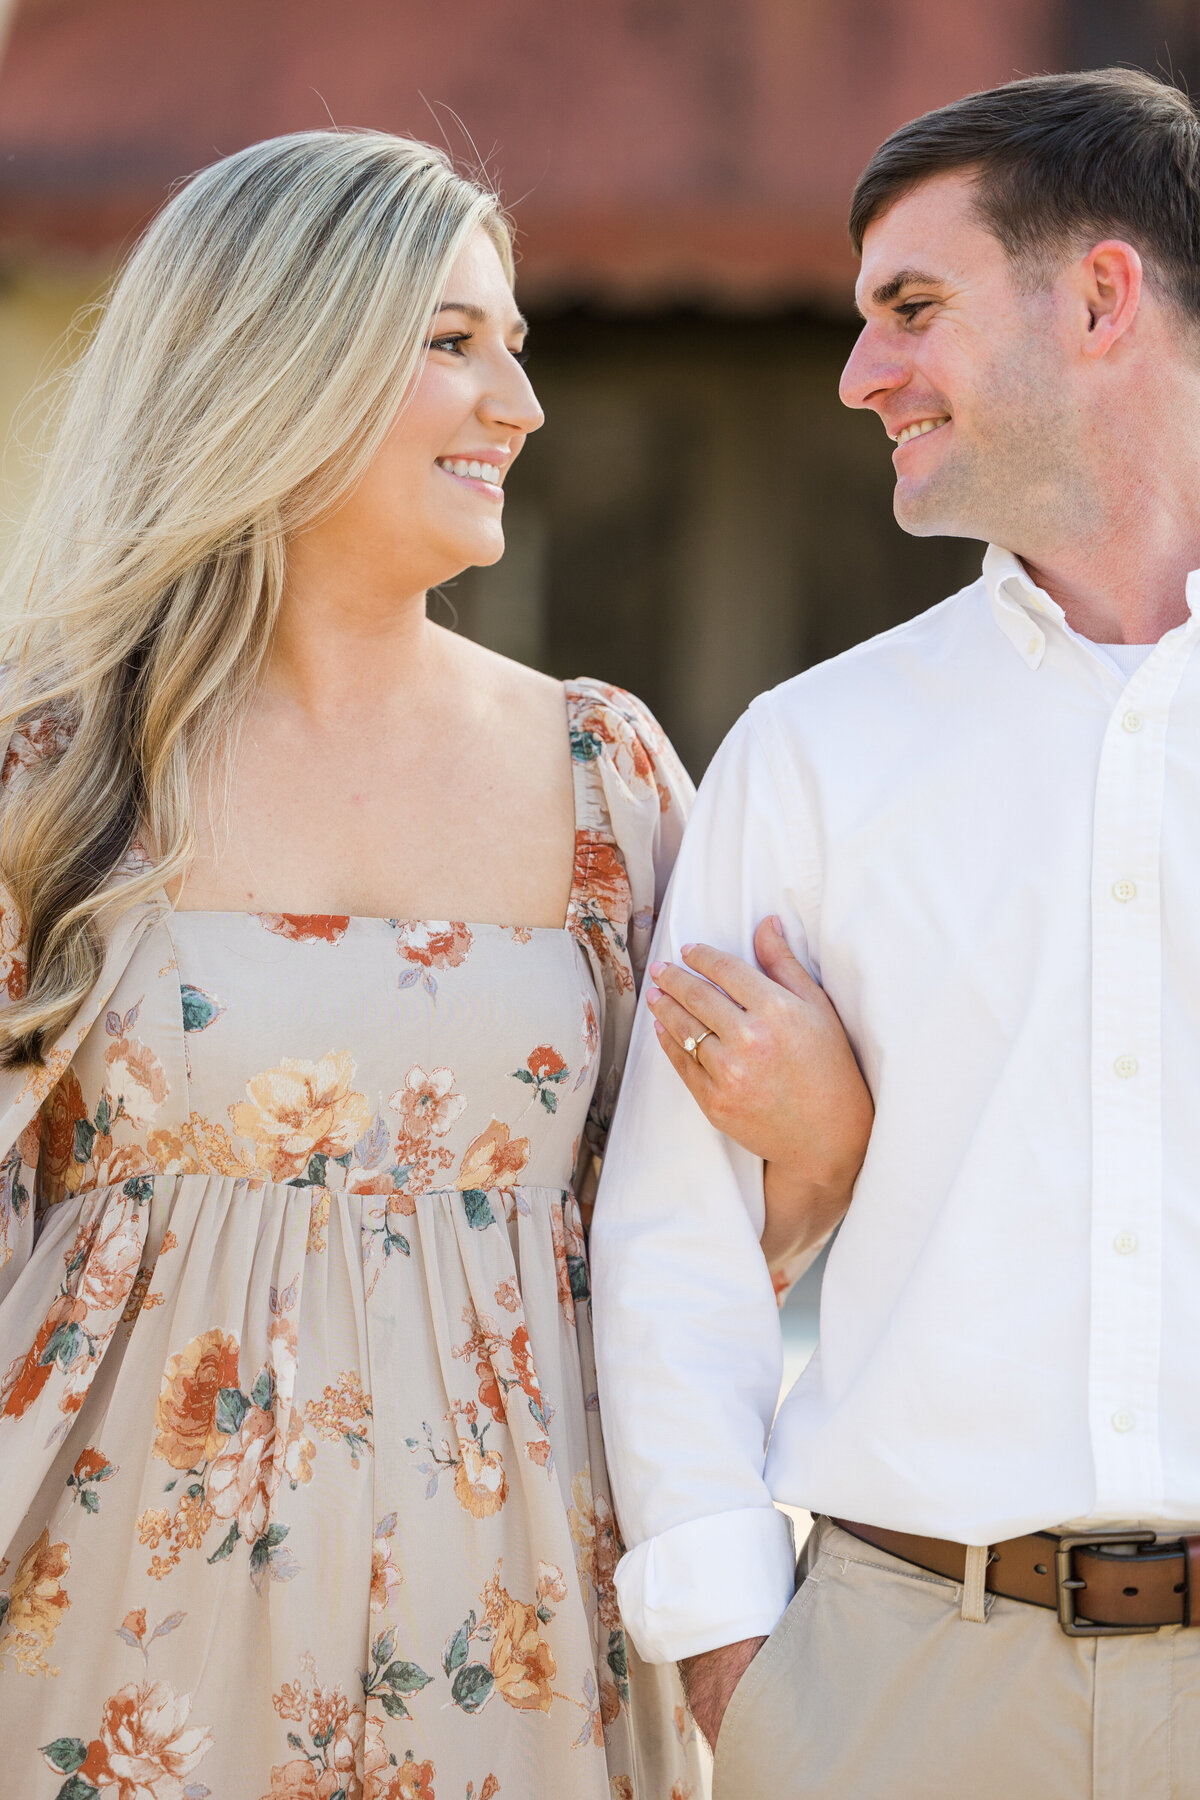 Mary Warren Engagement Session - Taylor'd Southern Events - Florida Wedding Photographer-5645